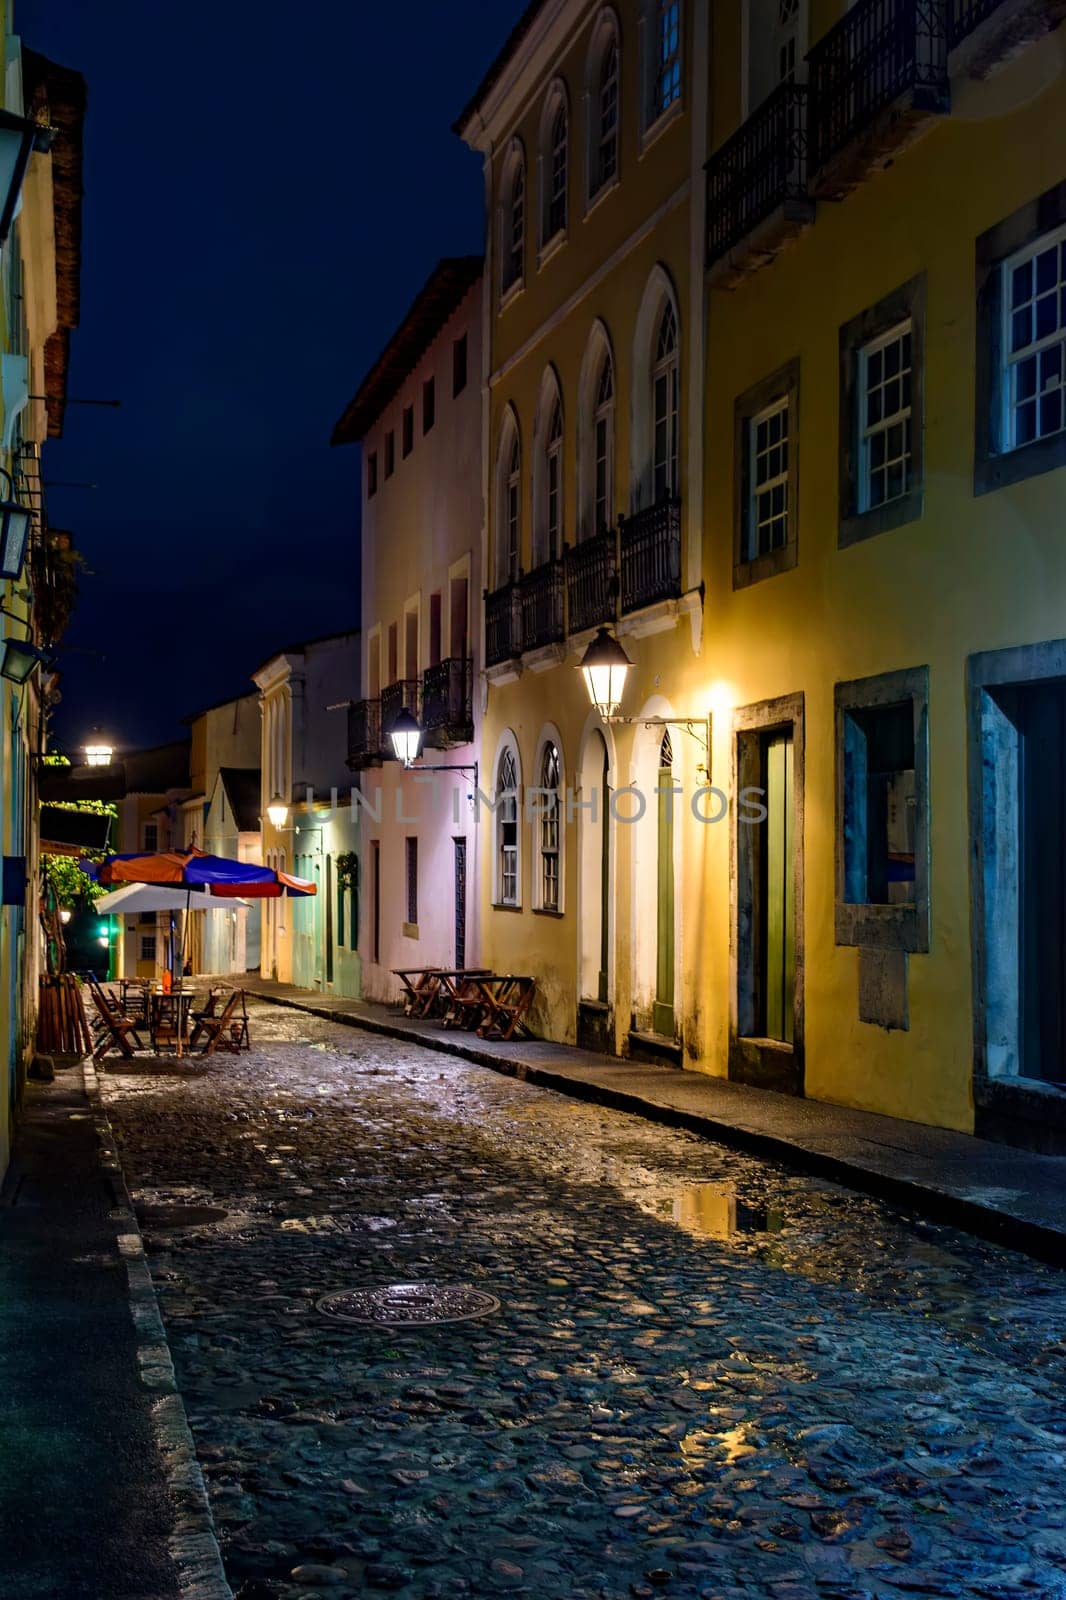 Pelourinho street in Salvador city at night with the facade of old houses illuminated by lanterns